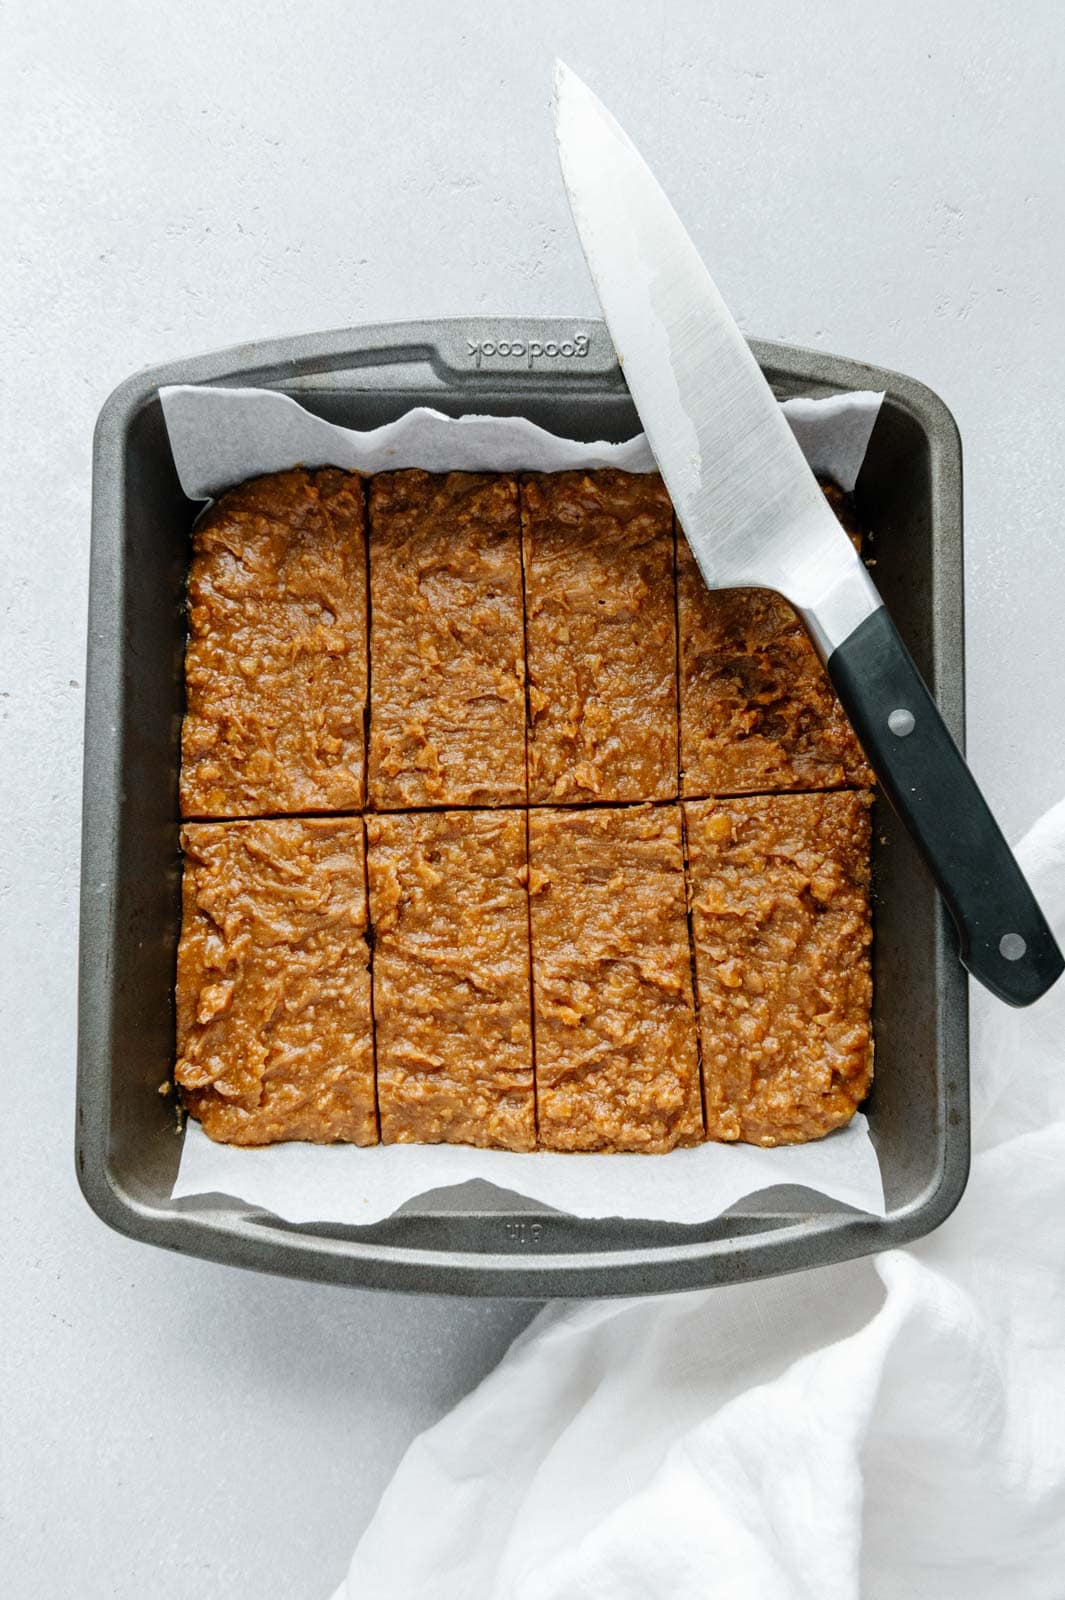 The filling of homemade Butterfingers cut into bars.